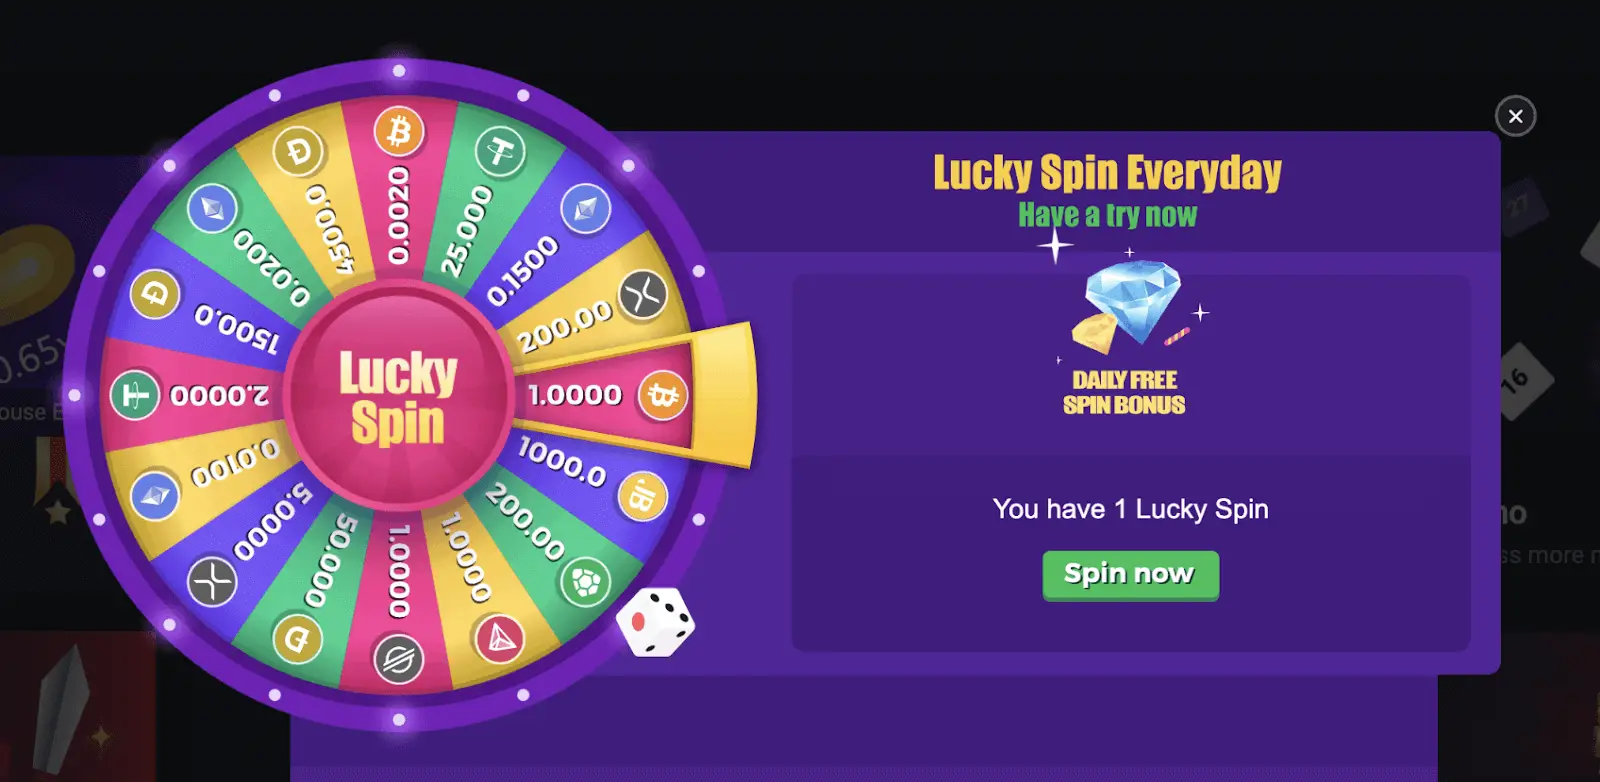 Tap to Lucky Spin Everyday and Win Rewards